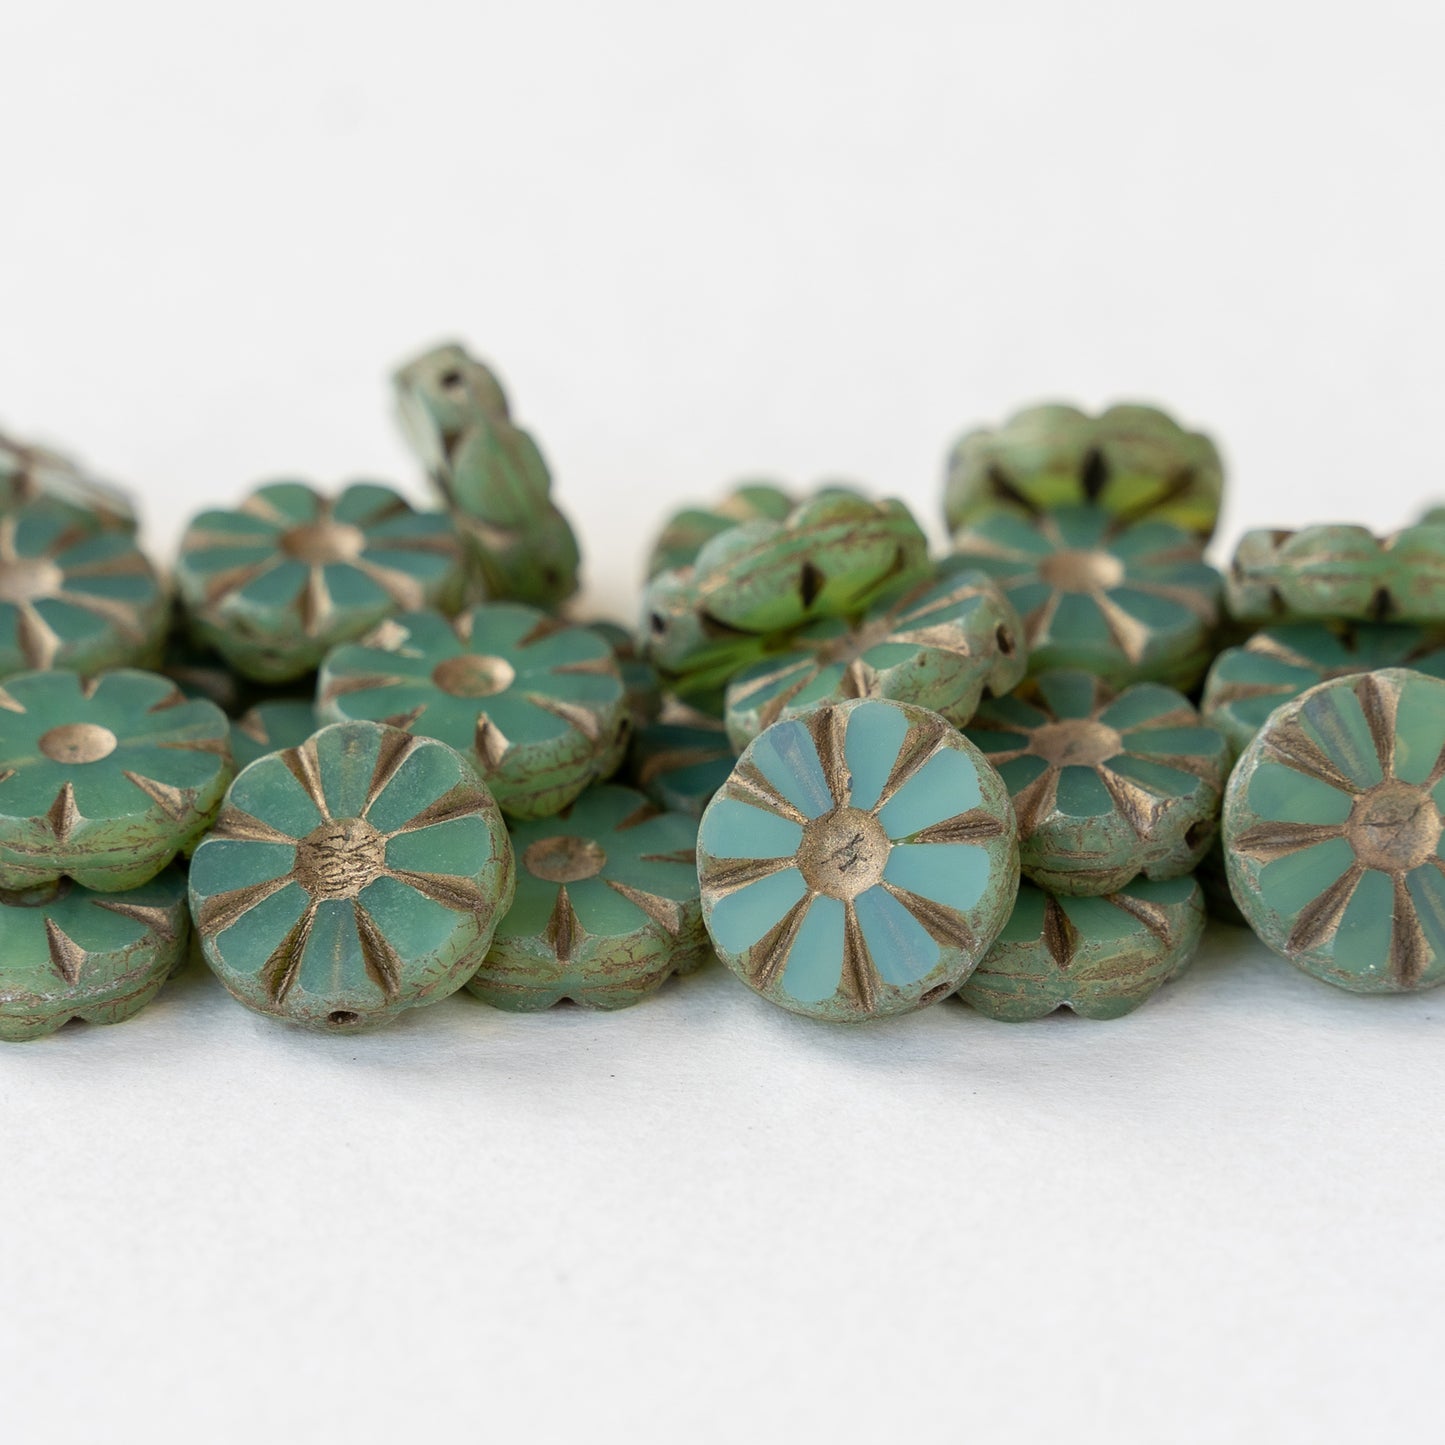 12mm Coin Beads - Sage Green with Gold Wash - 10 or 30 Beads